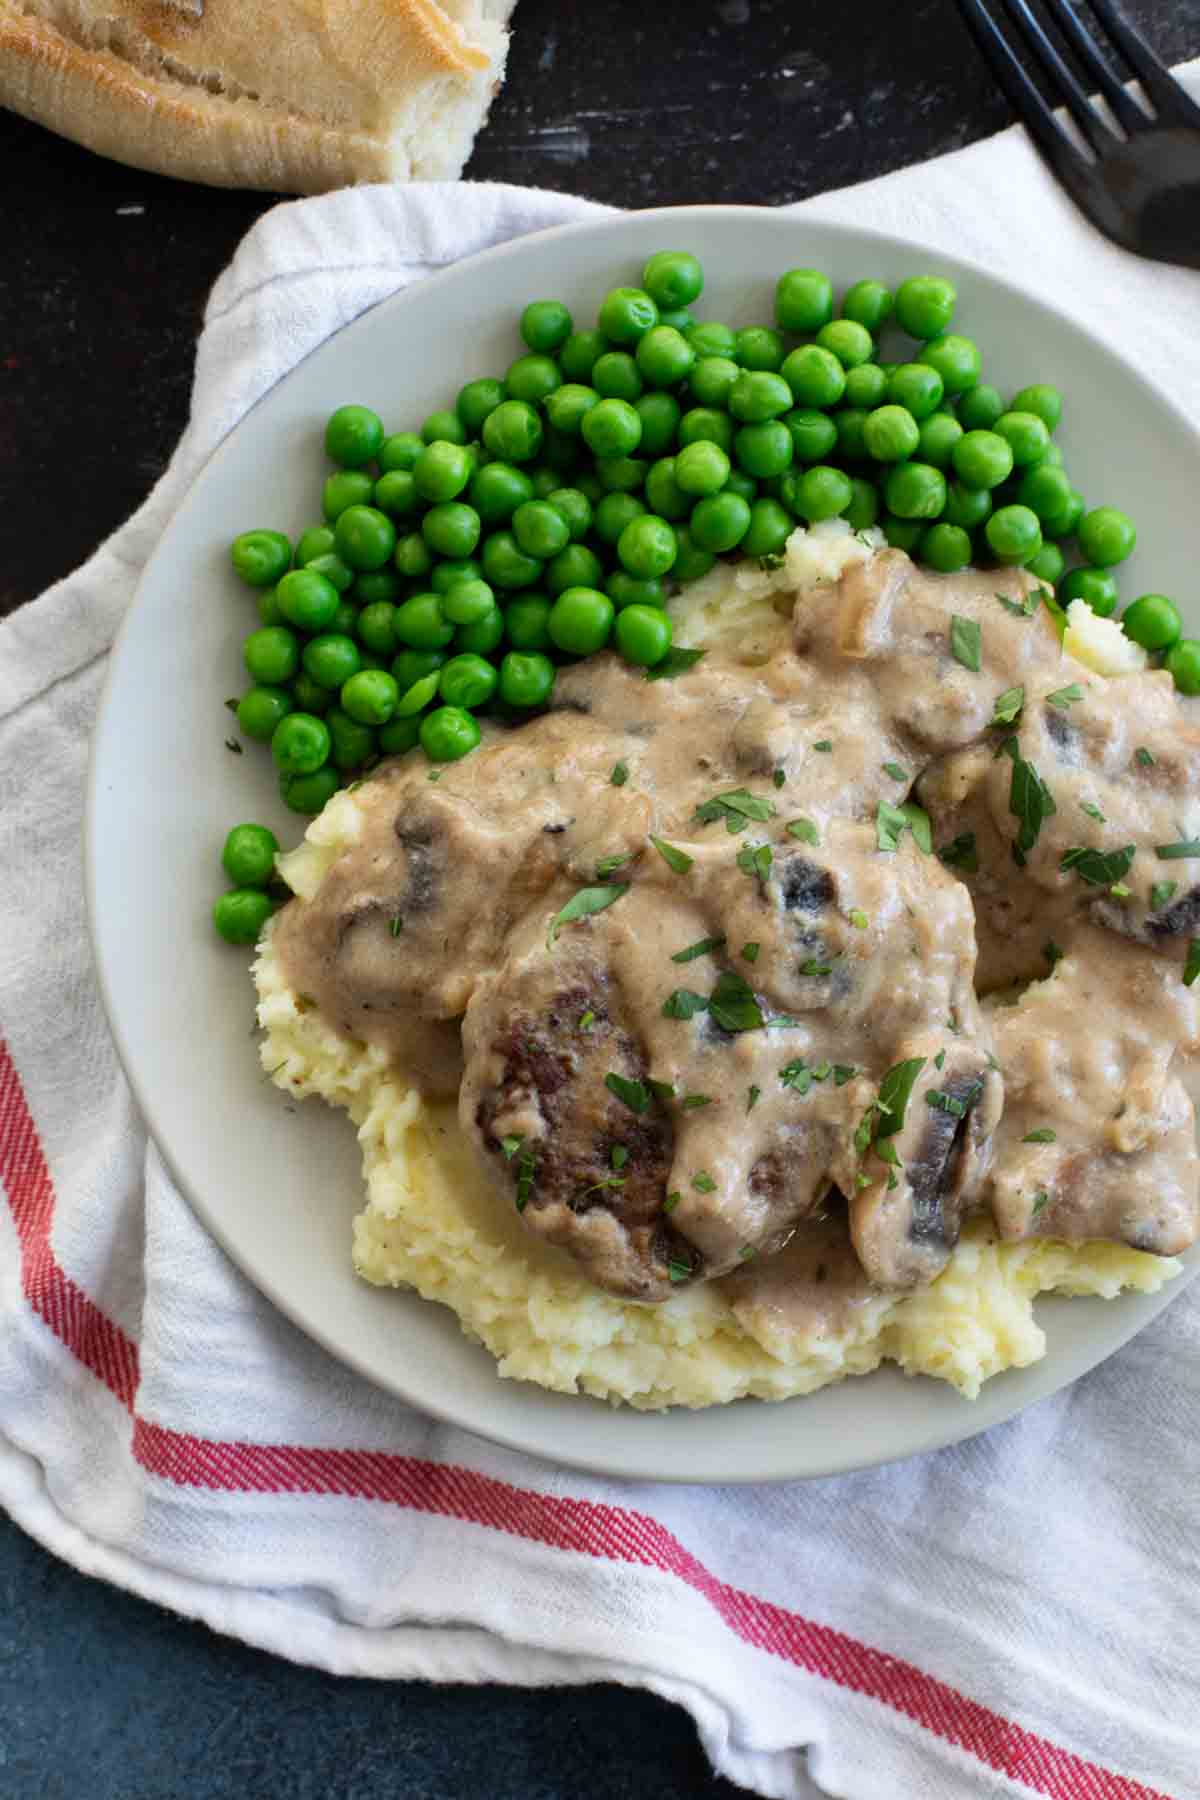 Plate with salisbury steak and gravy over mashed potatoes with peas.